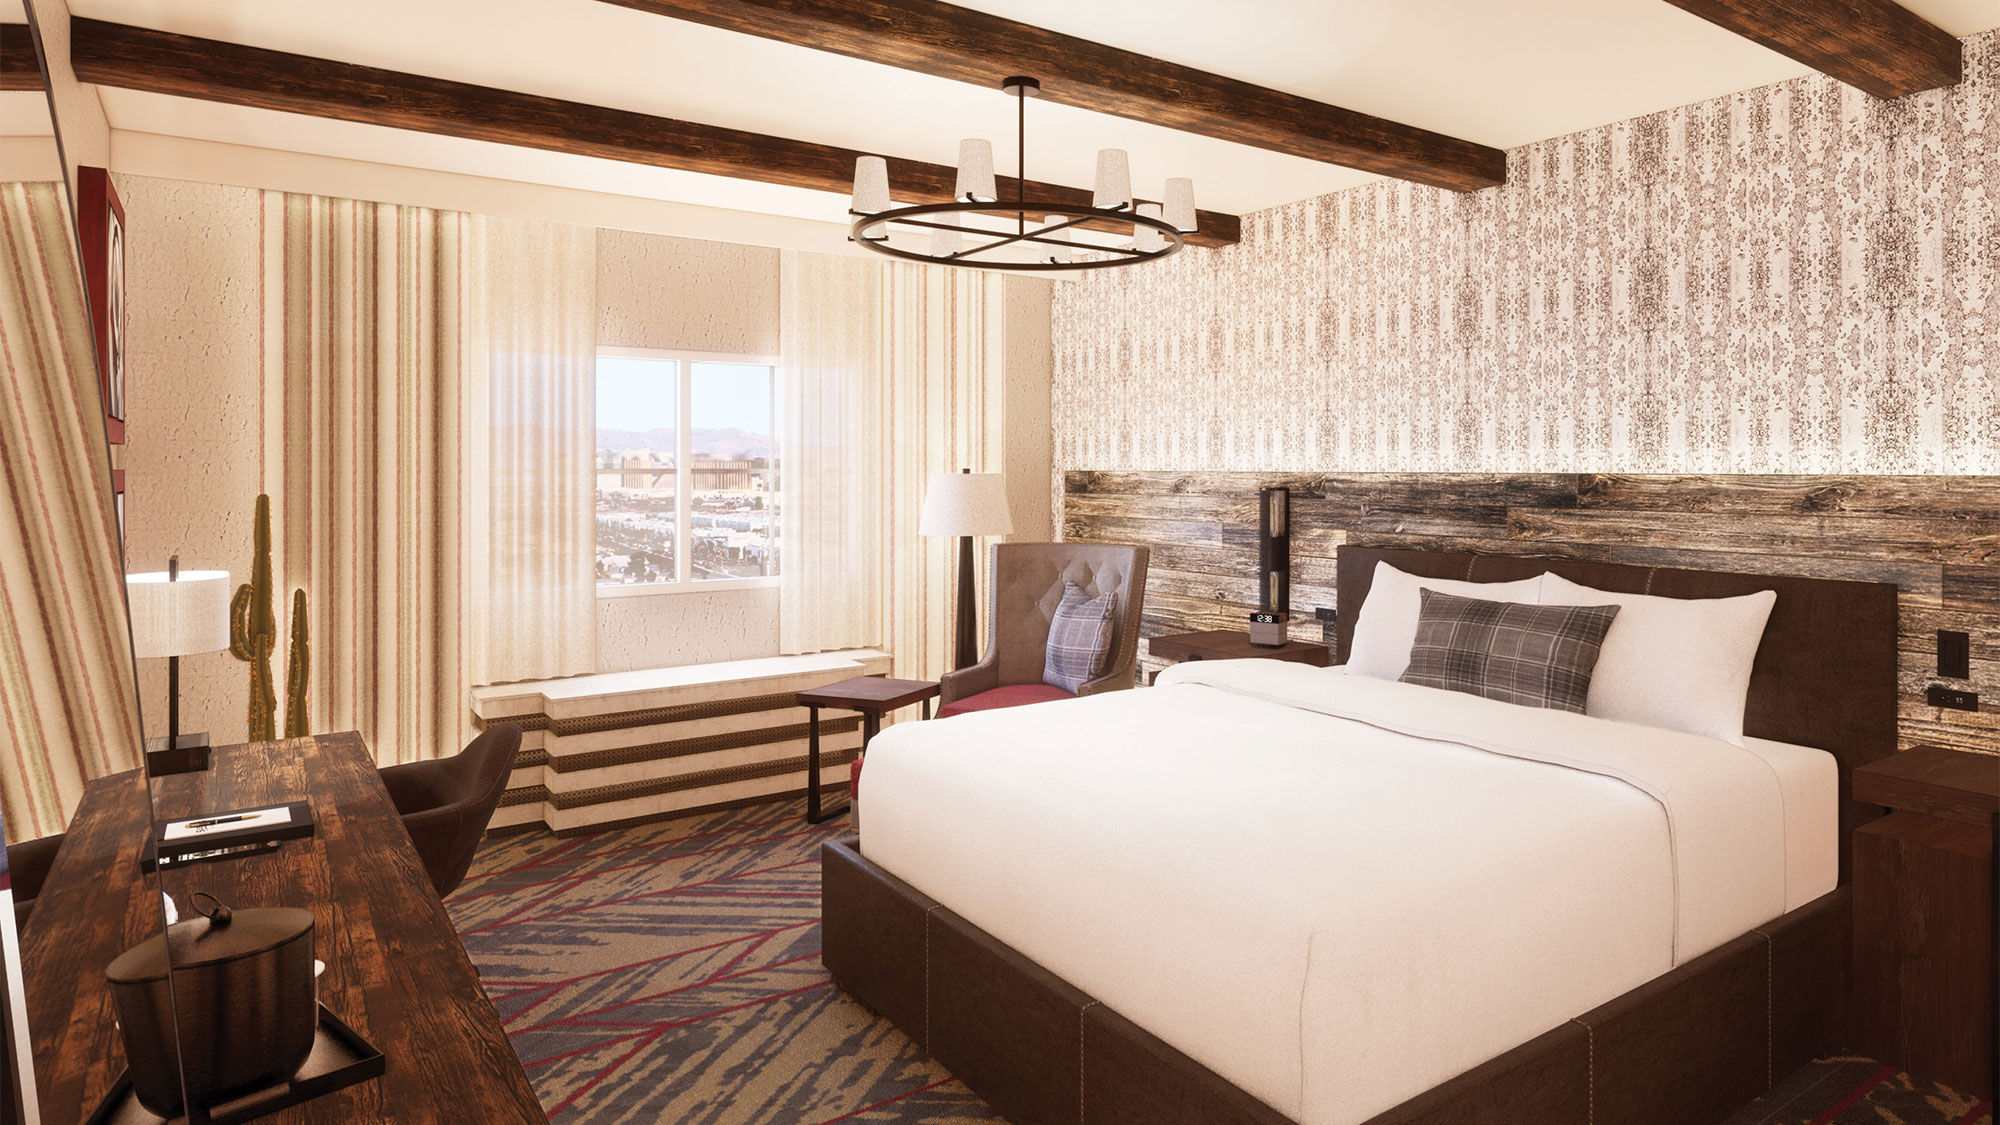 A rendering of a room in the Rustic Modern Collection at the Silverton Casino Hotel. Rooms and suites are being redone in what the property says are three distinct "design stories."